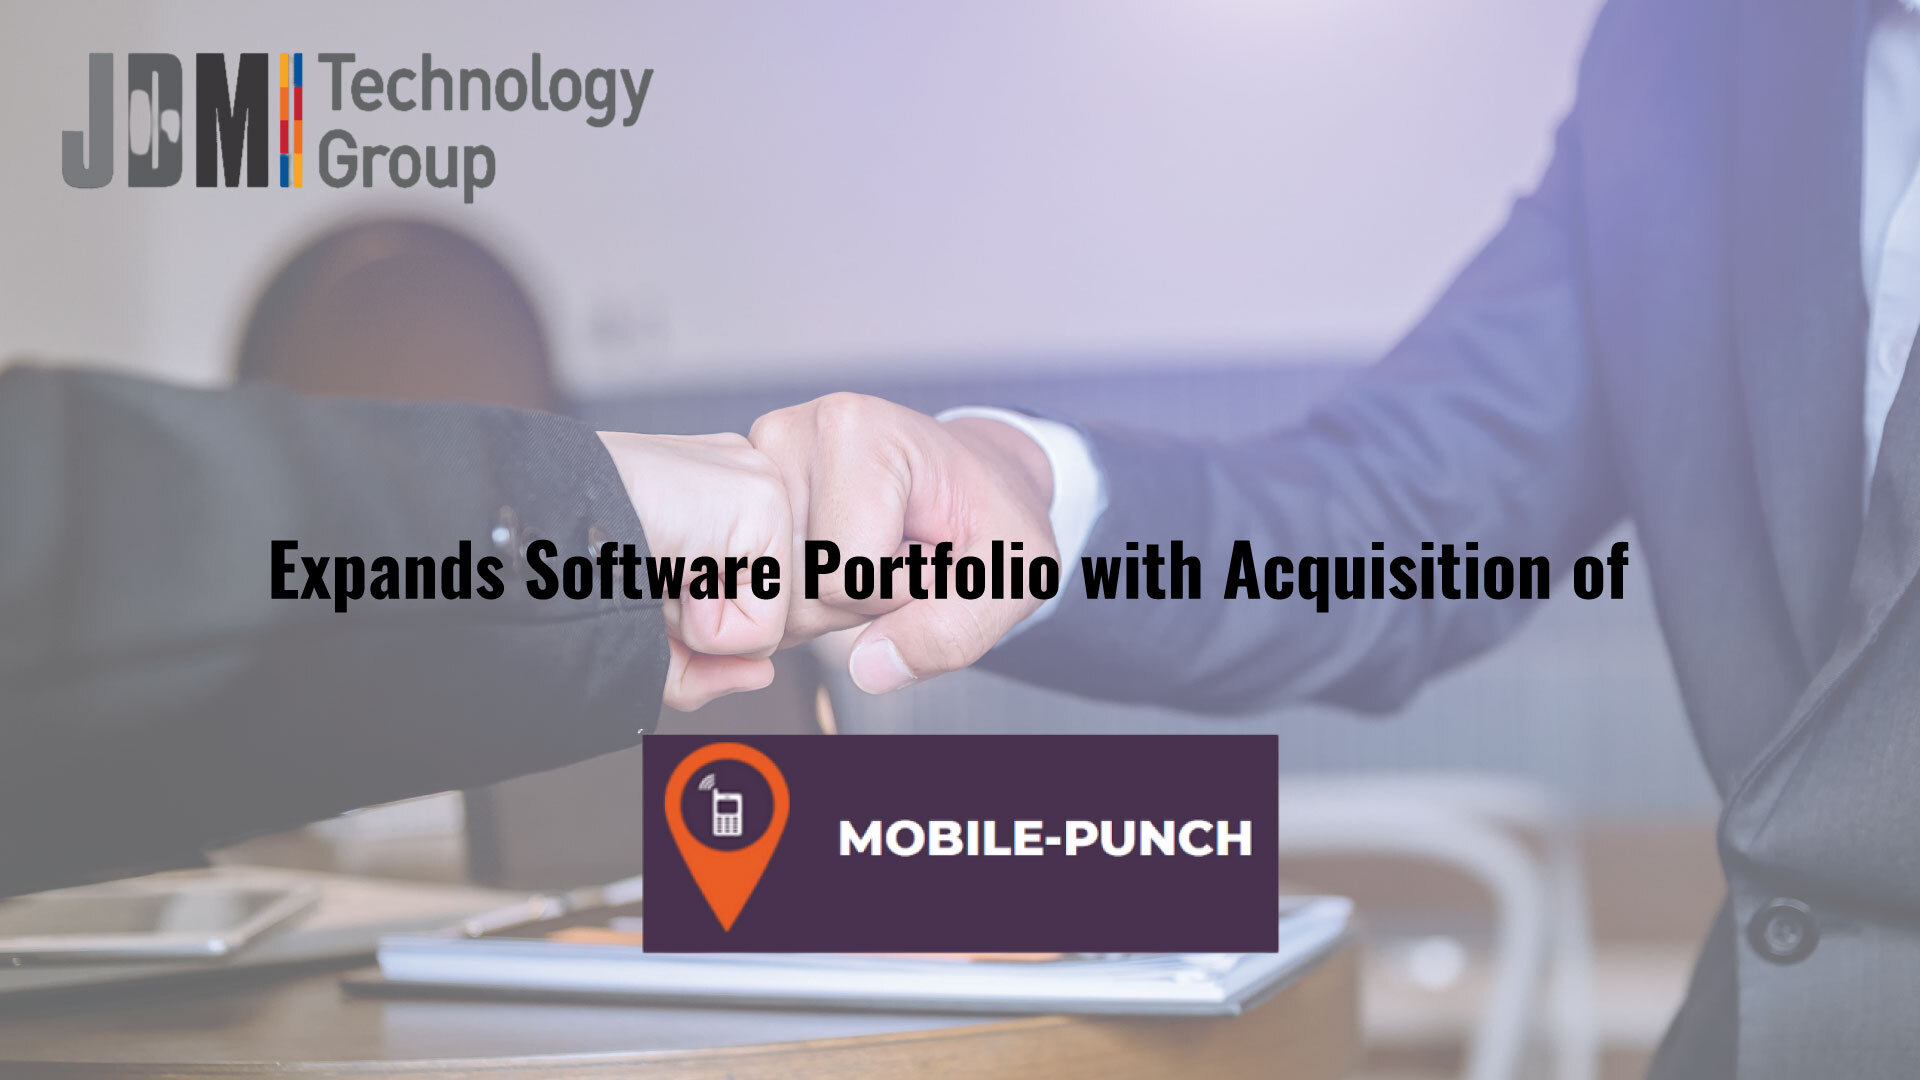 JDM Technology Group Expands Software Portfolio with Acquisition of Mobile-Punch